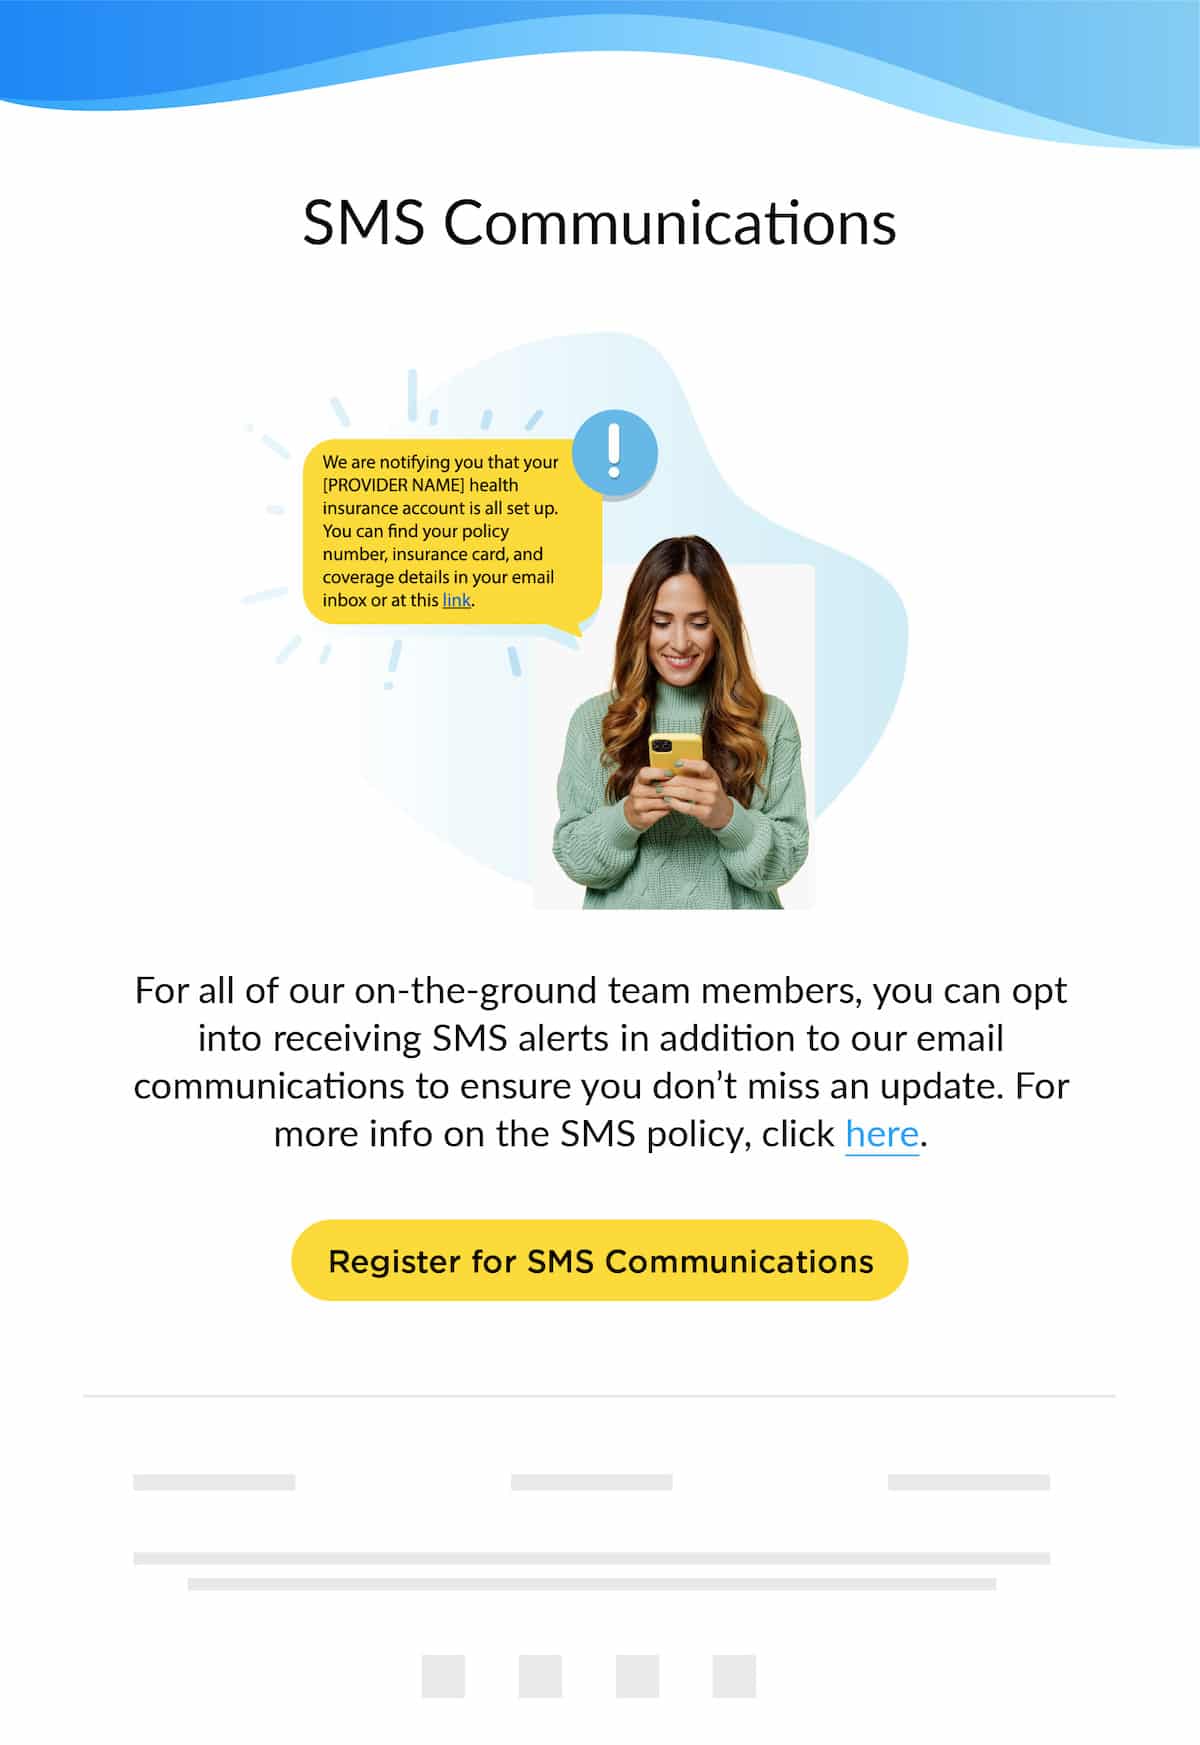 SMS opt-in CTA - SMS content best practices